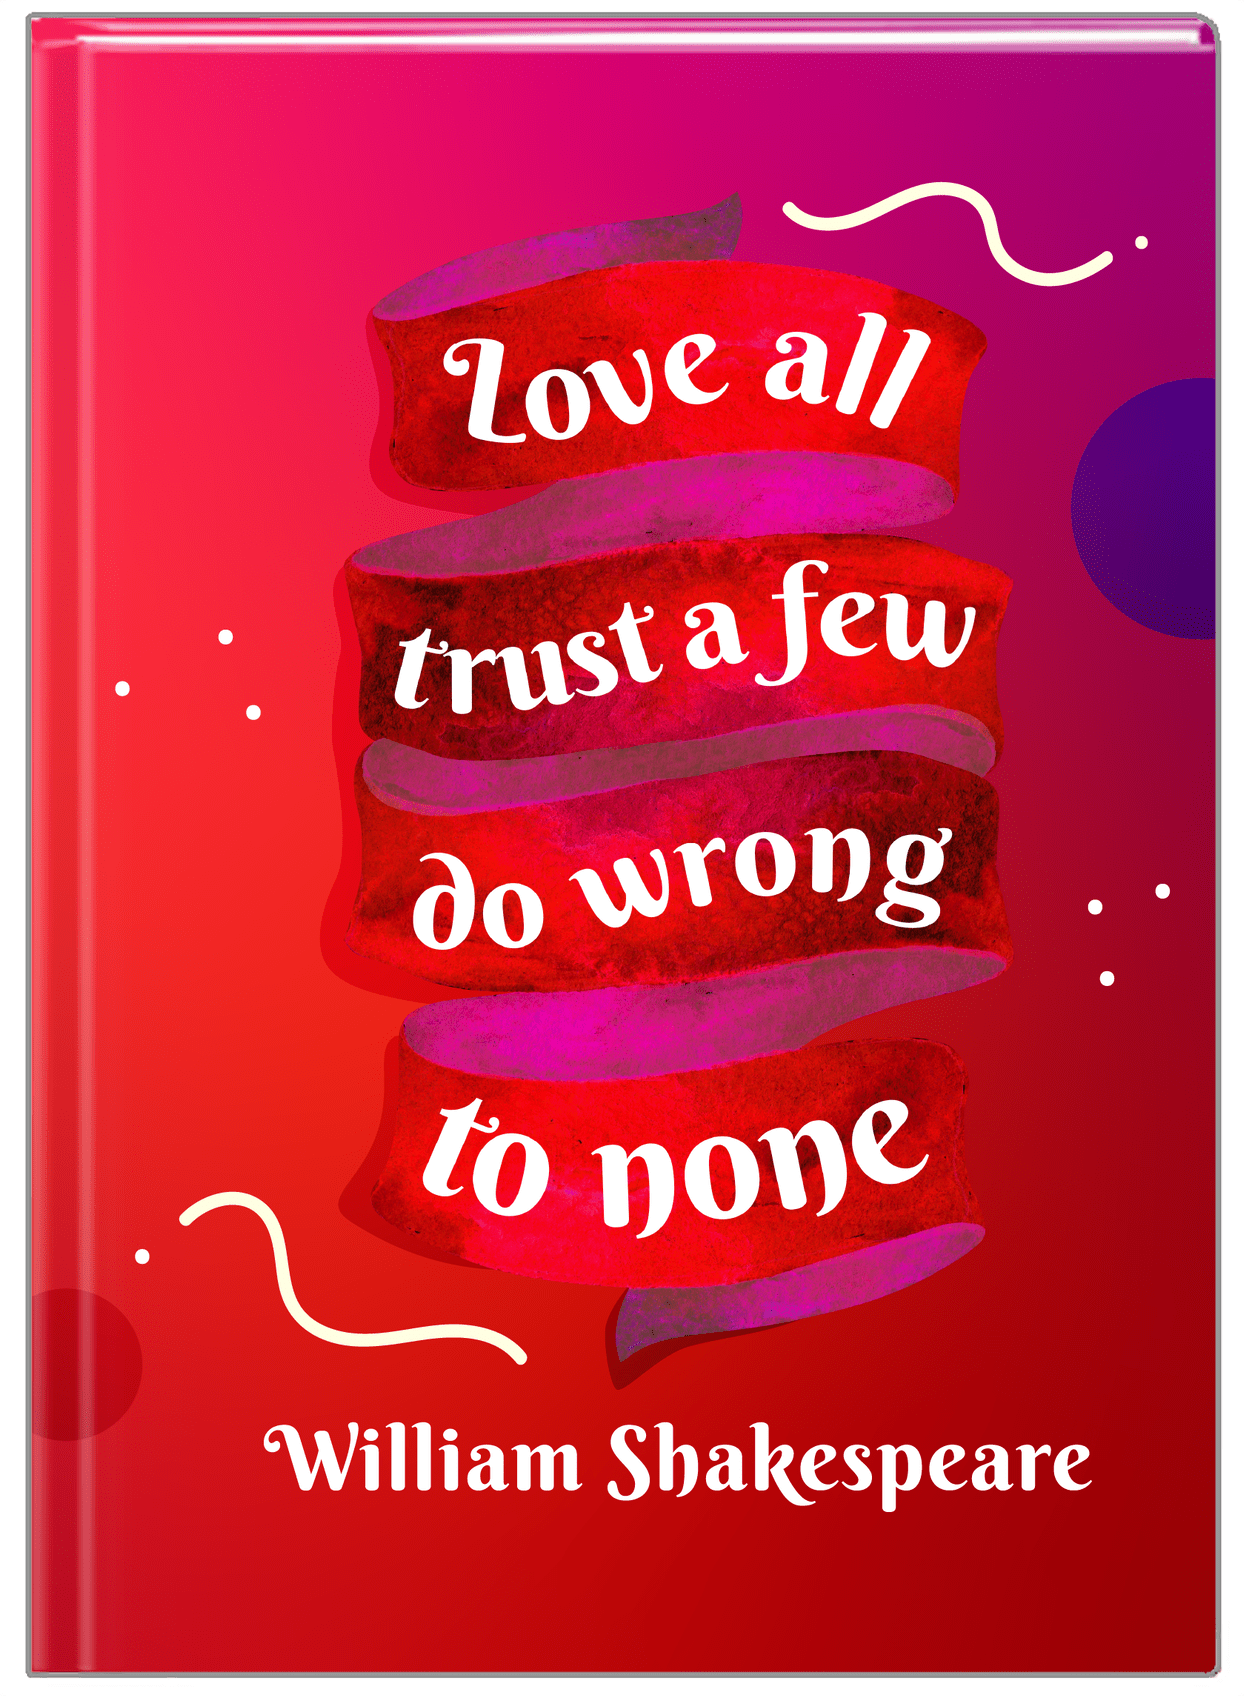 Famous Quotes Journal - William Shakespeare - Front View